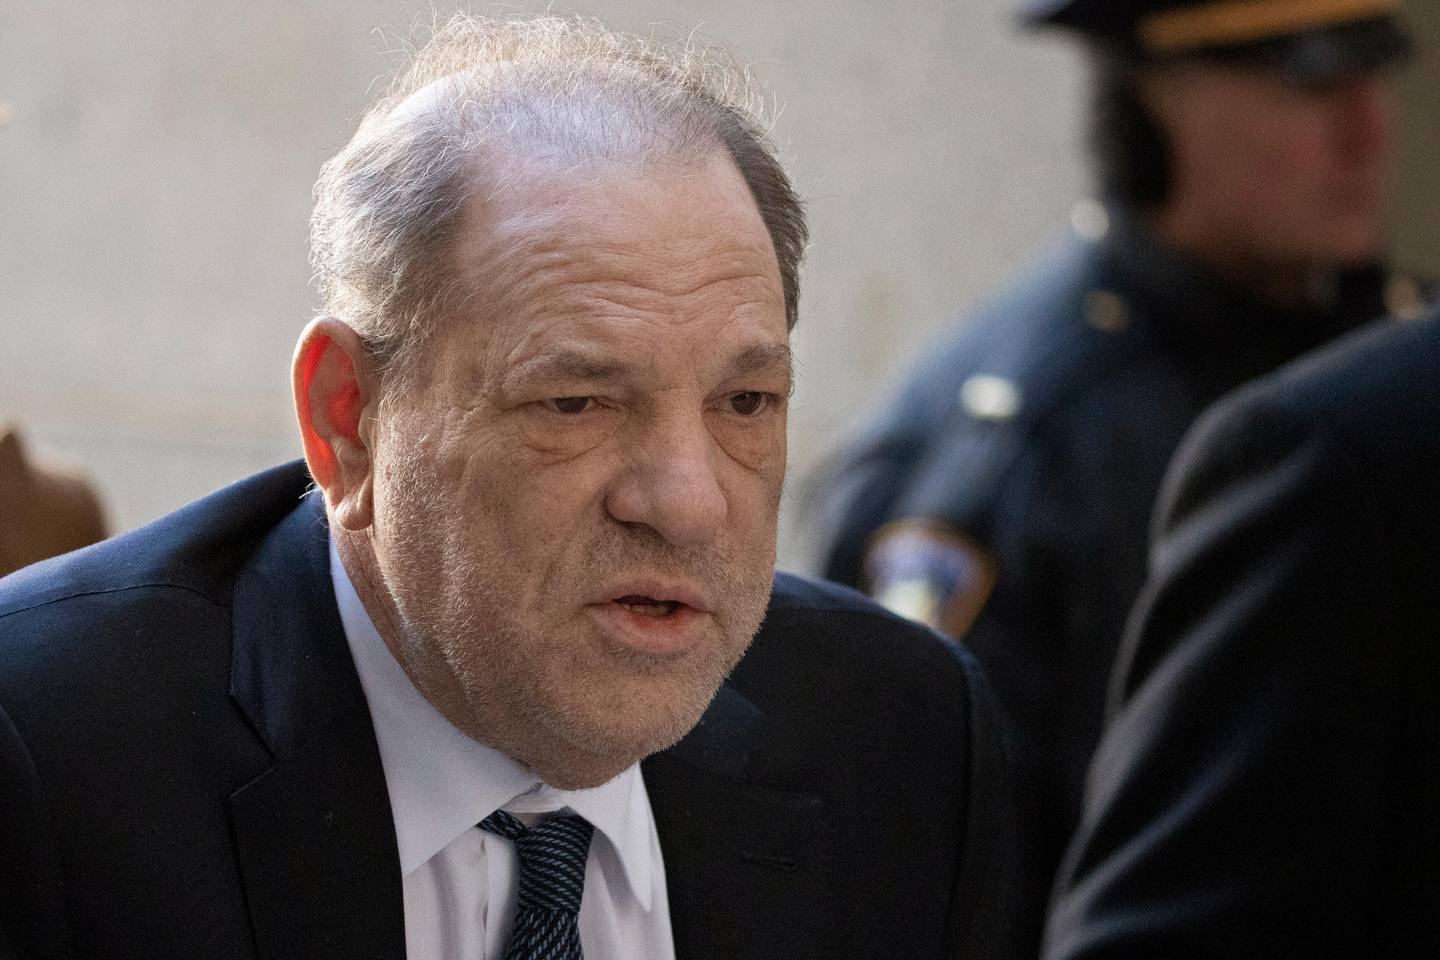 FILE - In this Feb. 21, 2020, file photo, Harvey Weinstein arrives at a Manhattan court as jury deliberations continue in his rape trial in New York. Weinstein tested positive for the coronavirus at a state prison in New York while serving a 23-year sentence for rape and sexual assault, the head of the state correctional officers union said Monday. (AP Photo/Mark Lennihan, File)